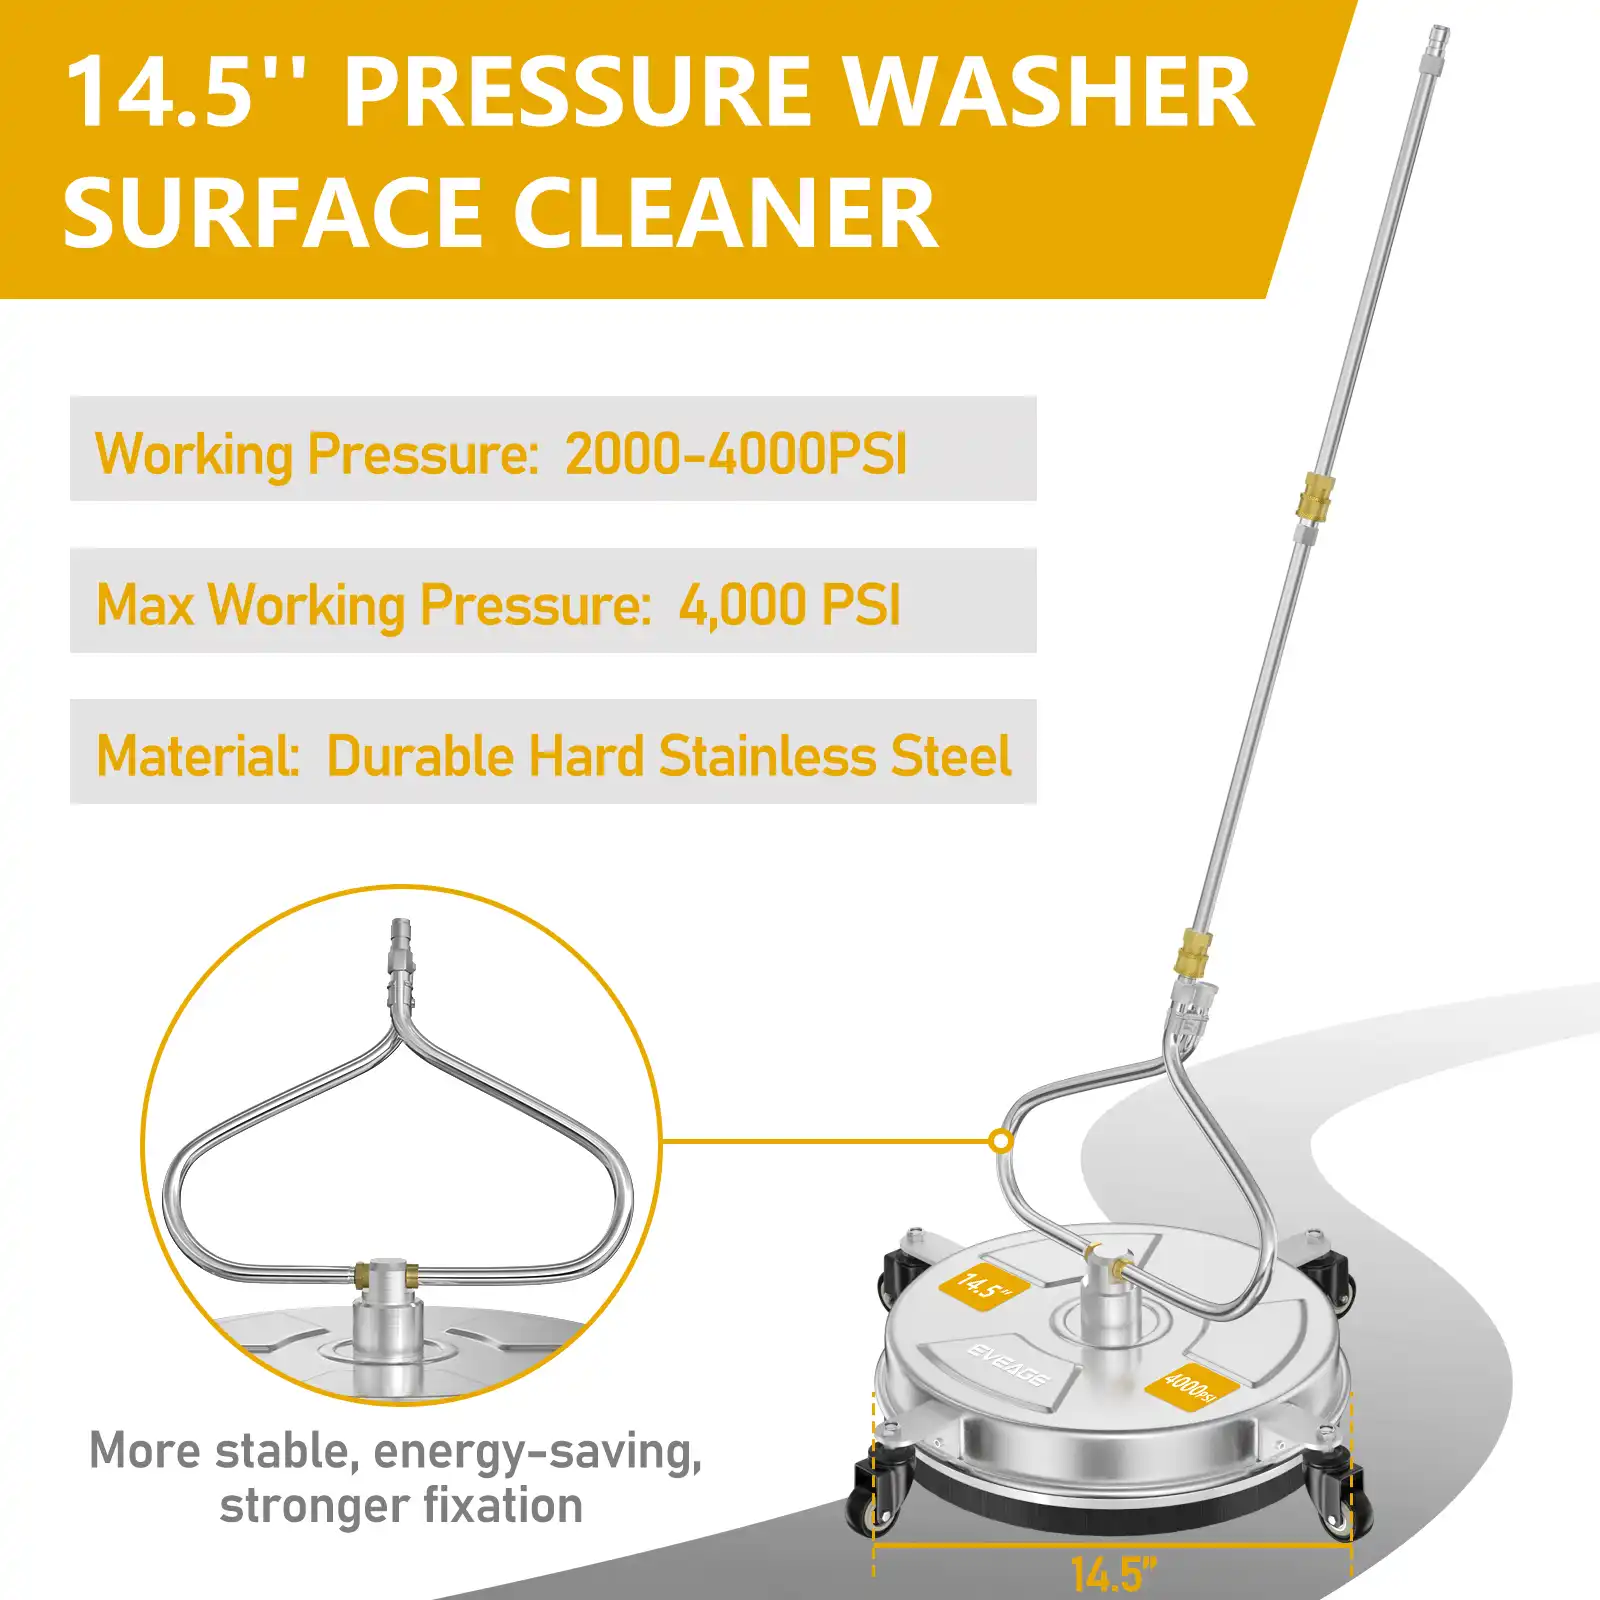 pressure washer with surface cleaner